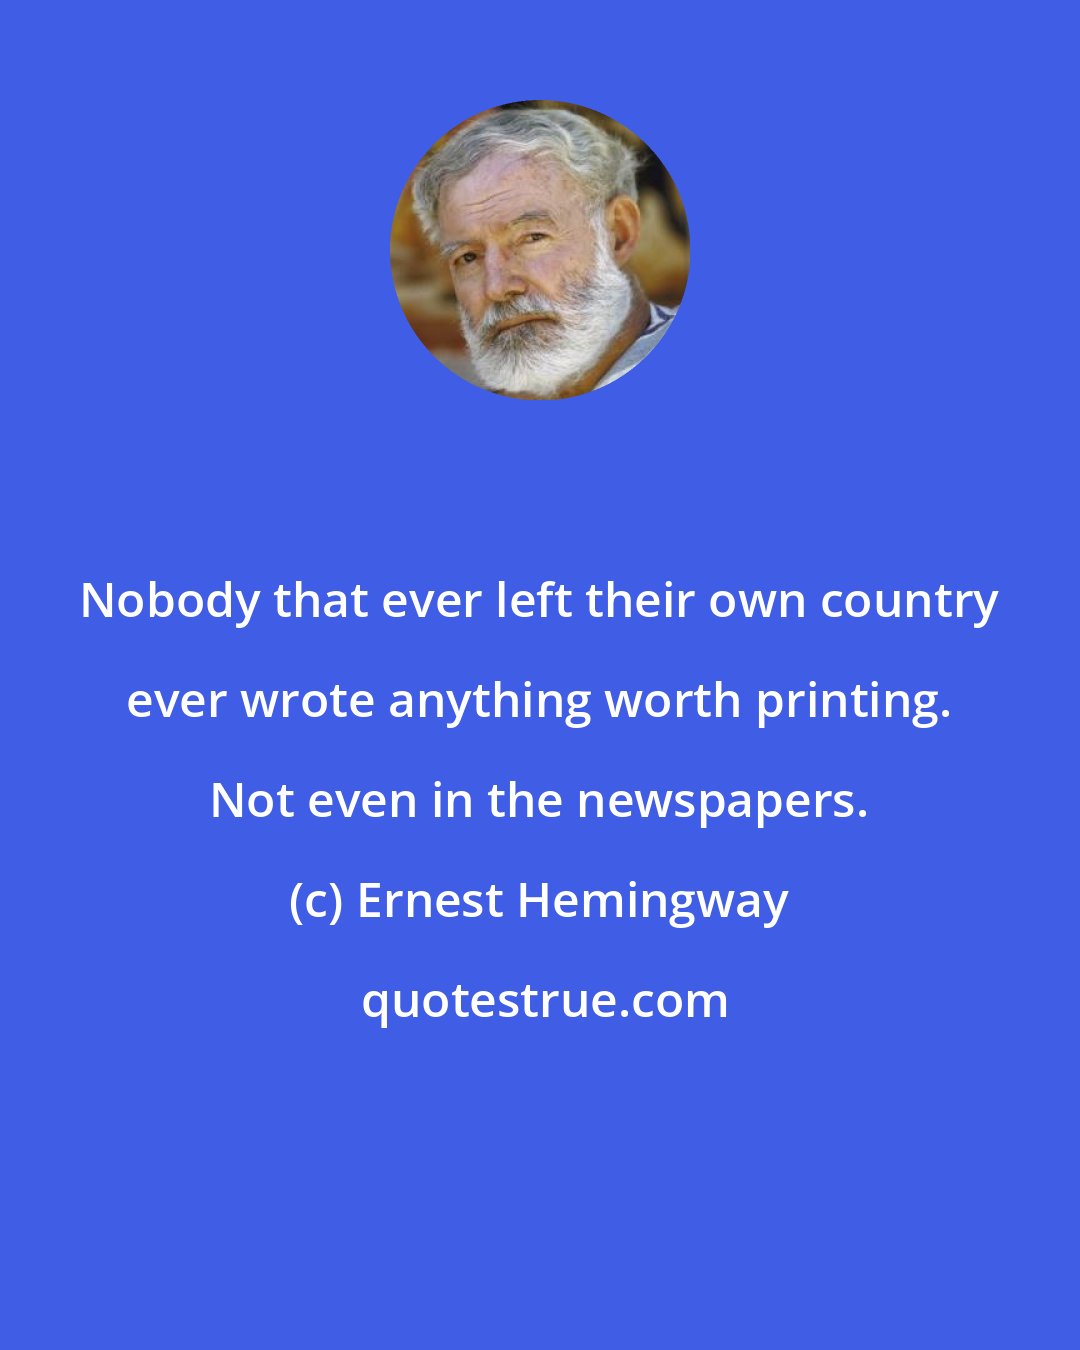 Ernest Hemingway: Nobody that ever left their own country ever wrote anything worth printing. Not even in the newspapers.